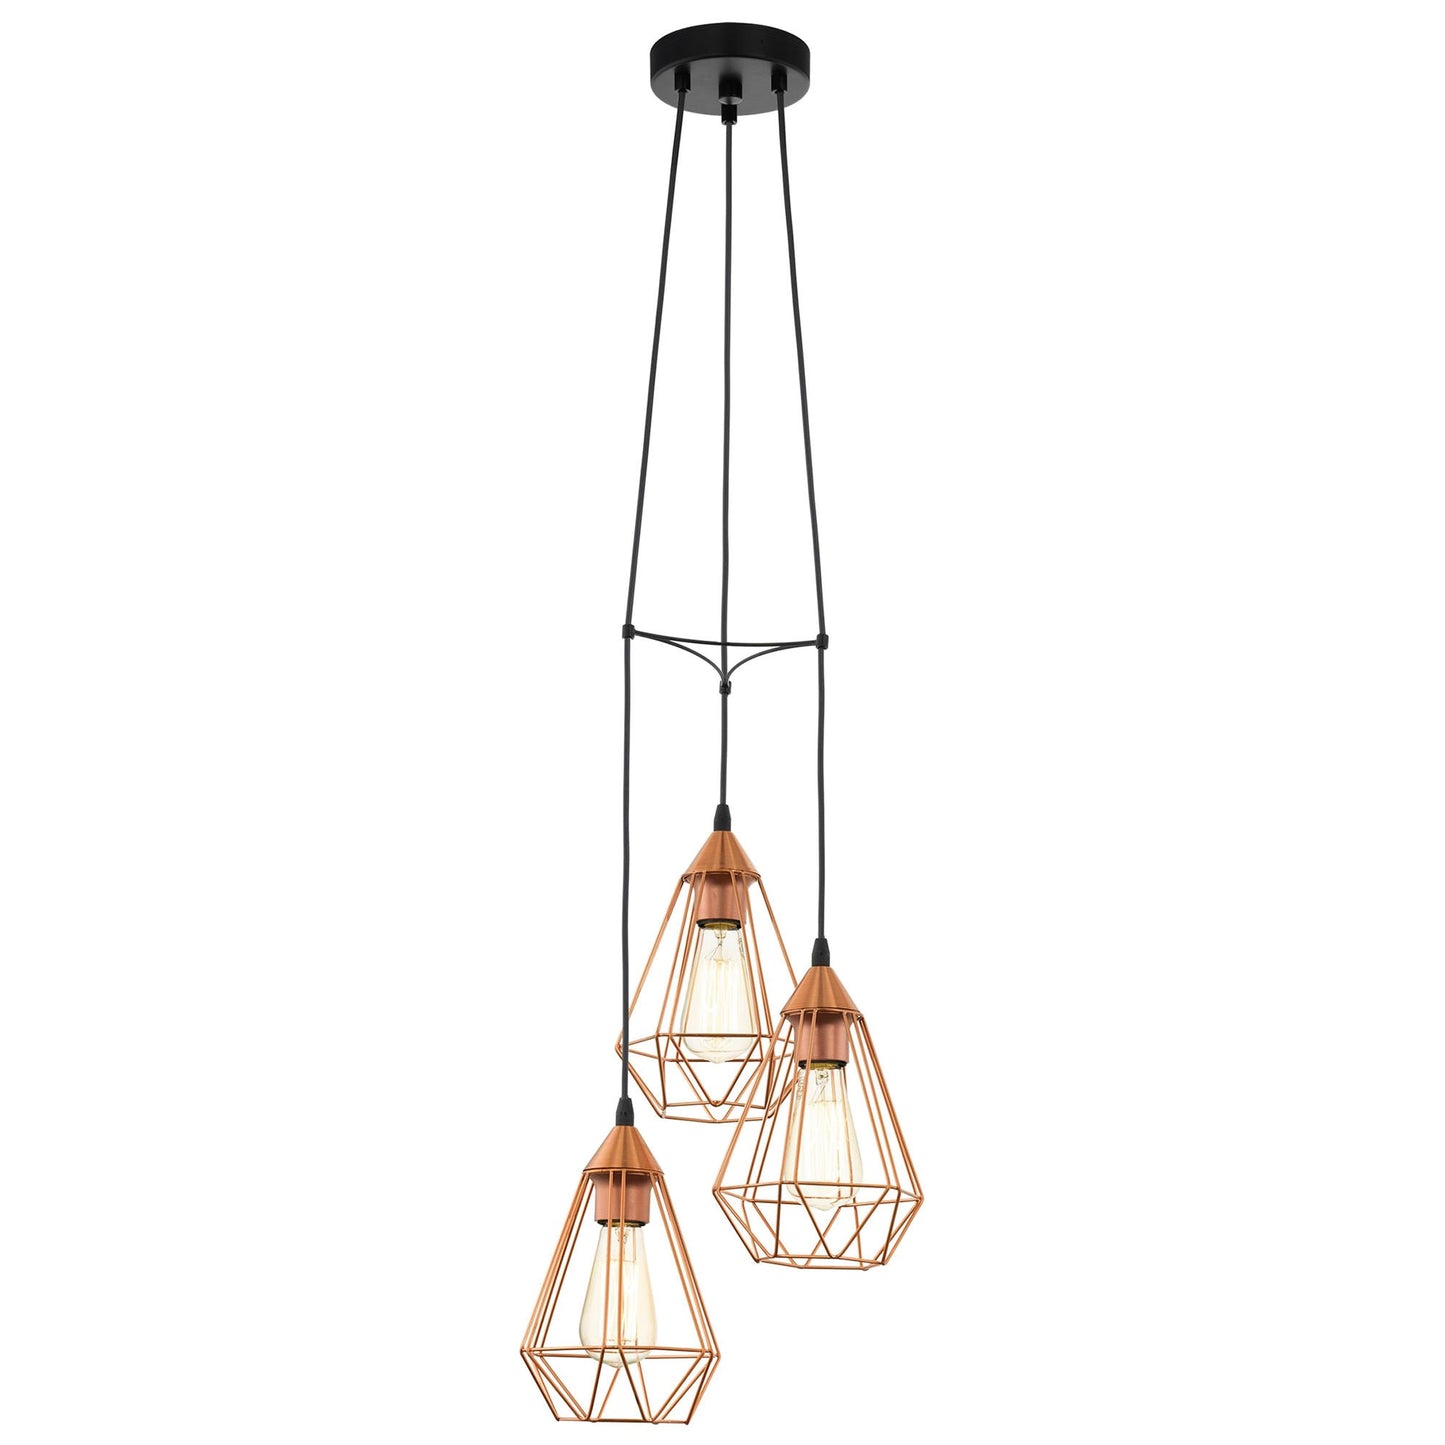 Tarbes Metal Wire Cluster Pendant Light, Copper